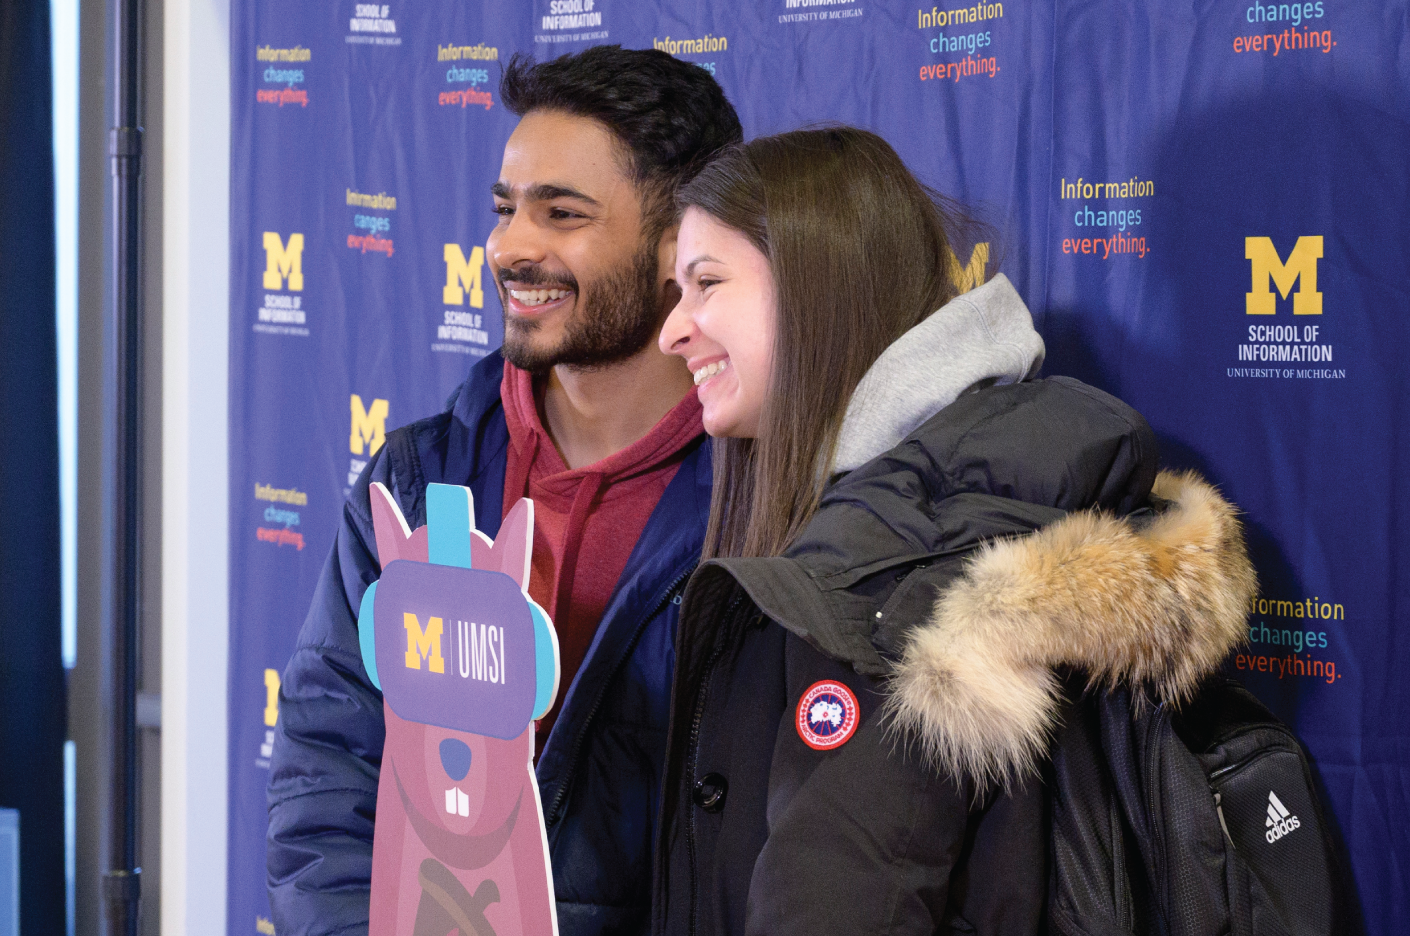 Two people standing together posing and smiling in front of a UMSI branded backdrop. They are holding a cutout of a purple squirrel holding an acorn and wearing a VR helmet. The helmet has the UMSI logo on it.